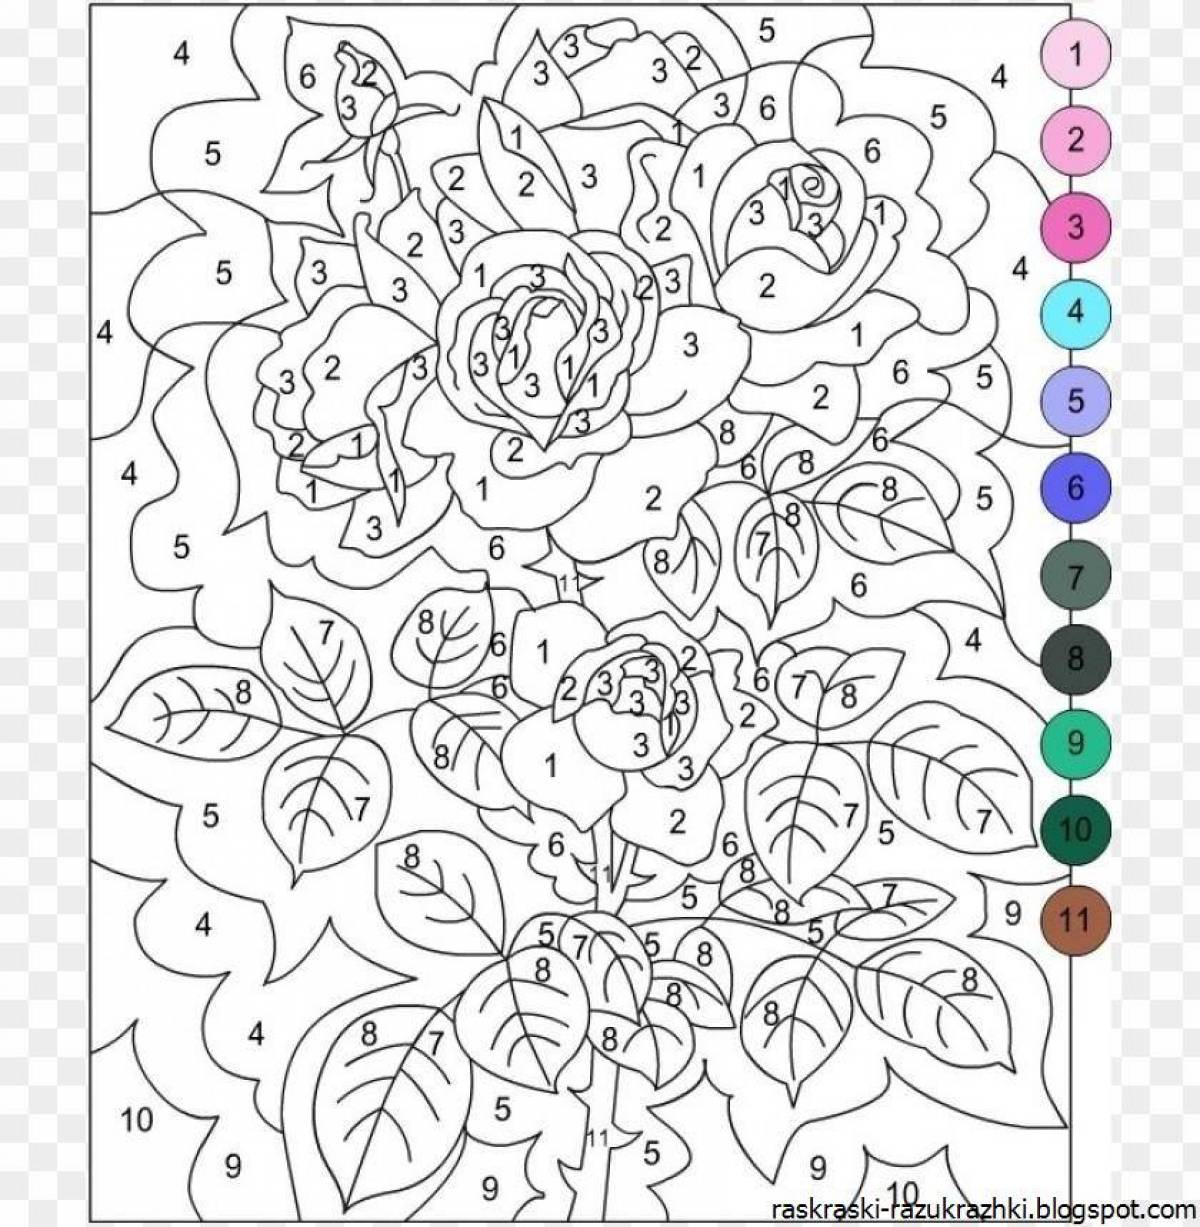 Fun coloring by numbers for girls